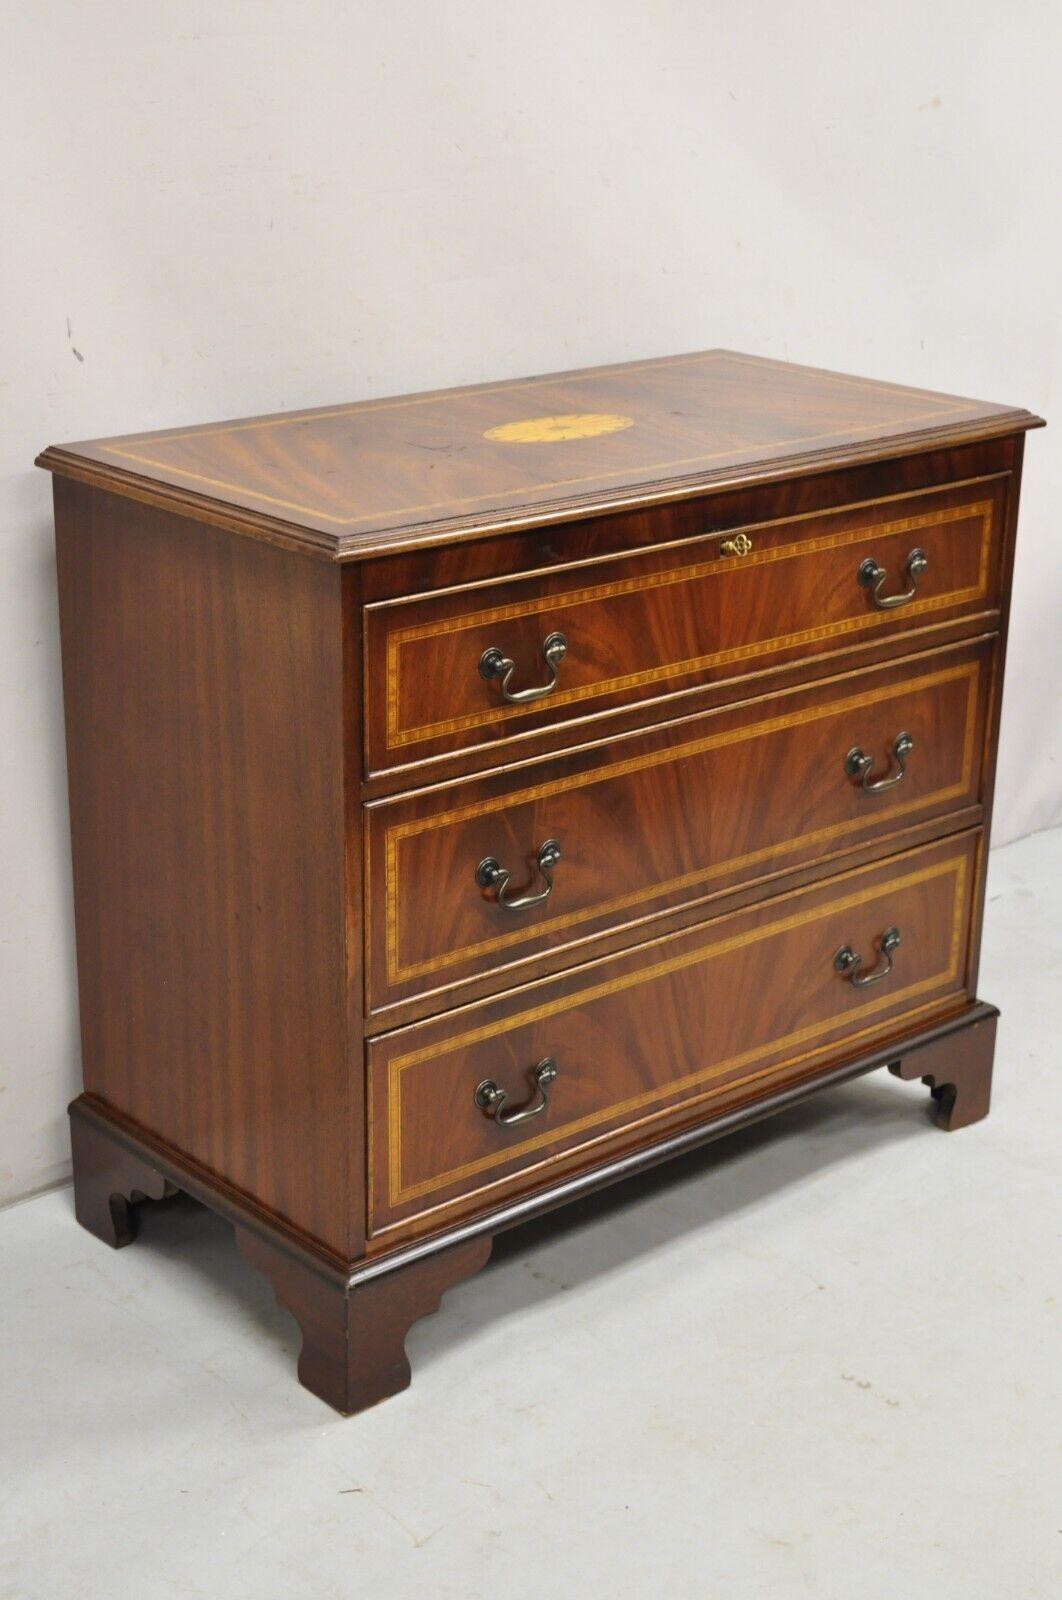 Vintage English Edwardian Style Mahogany Pinwheel Inlay 3 Drawer Dresser Chest In Good Condition For Sale In Philadelphia, PA